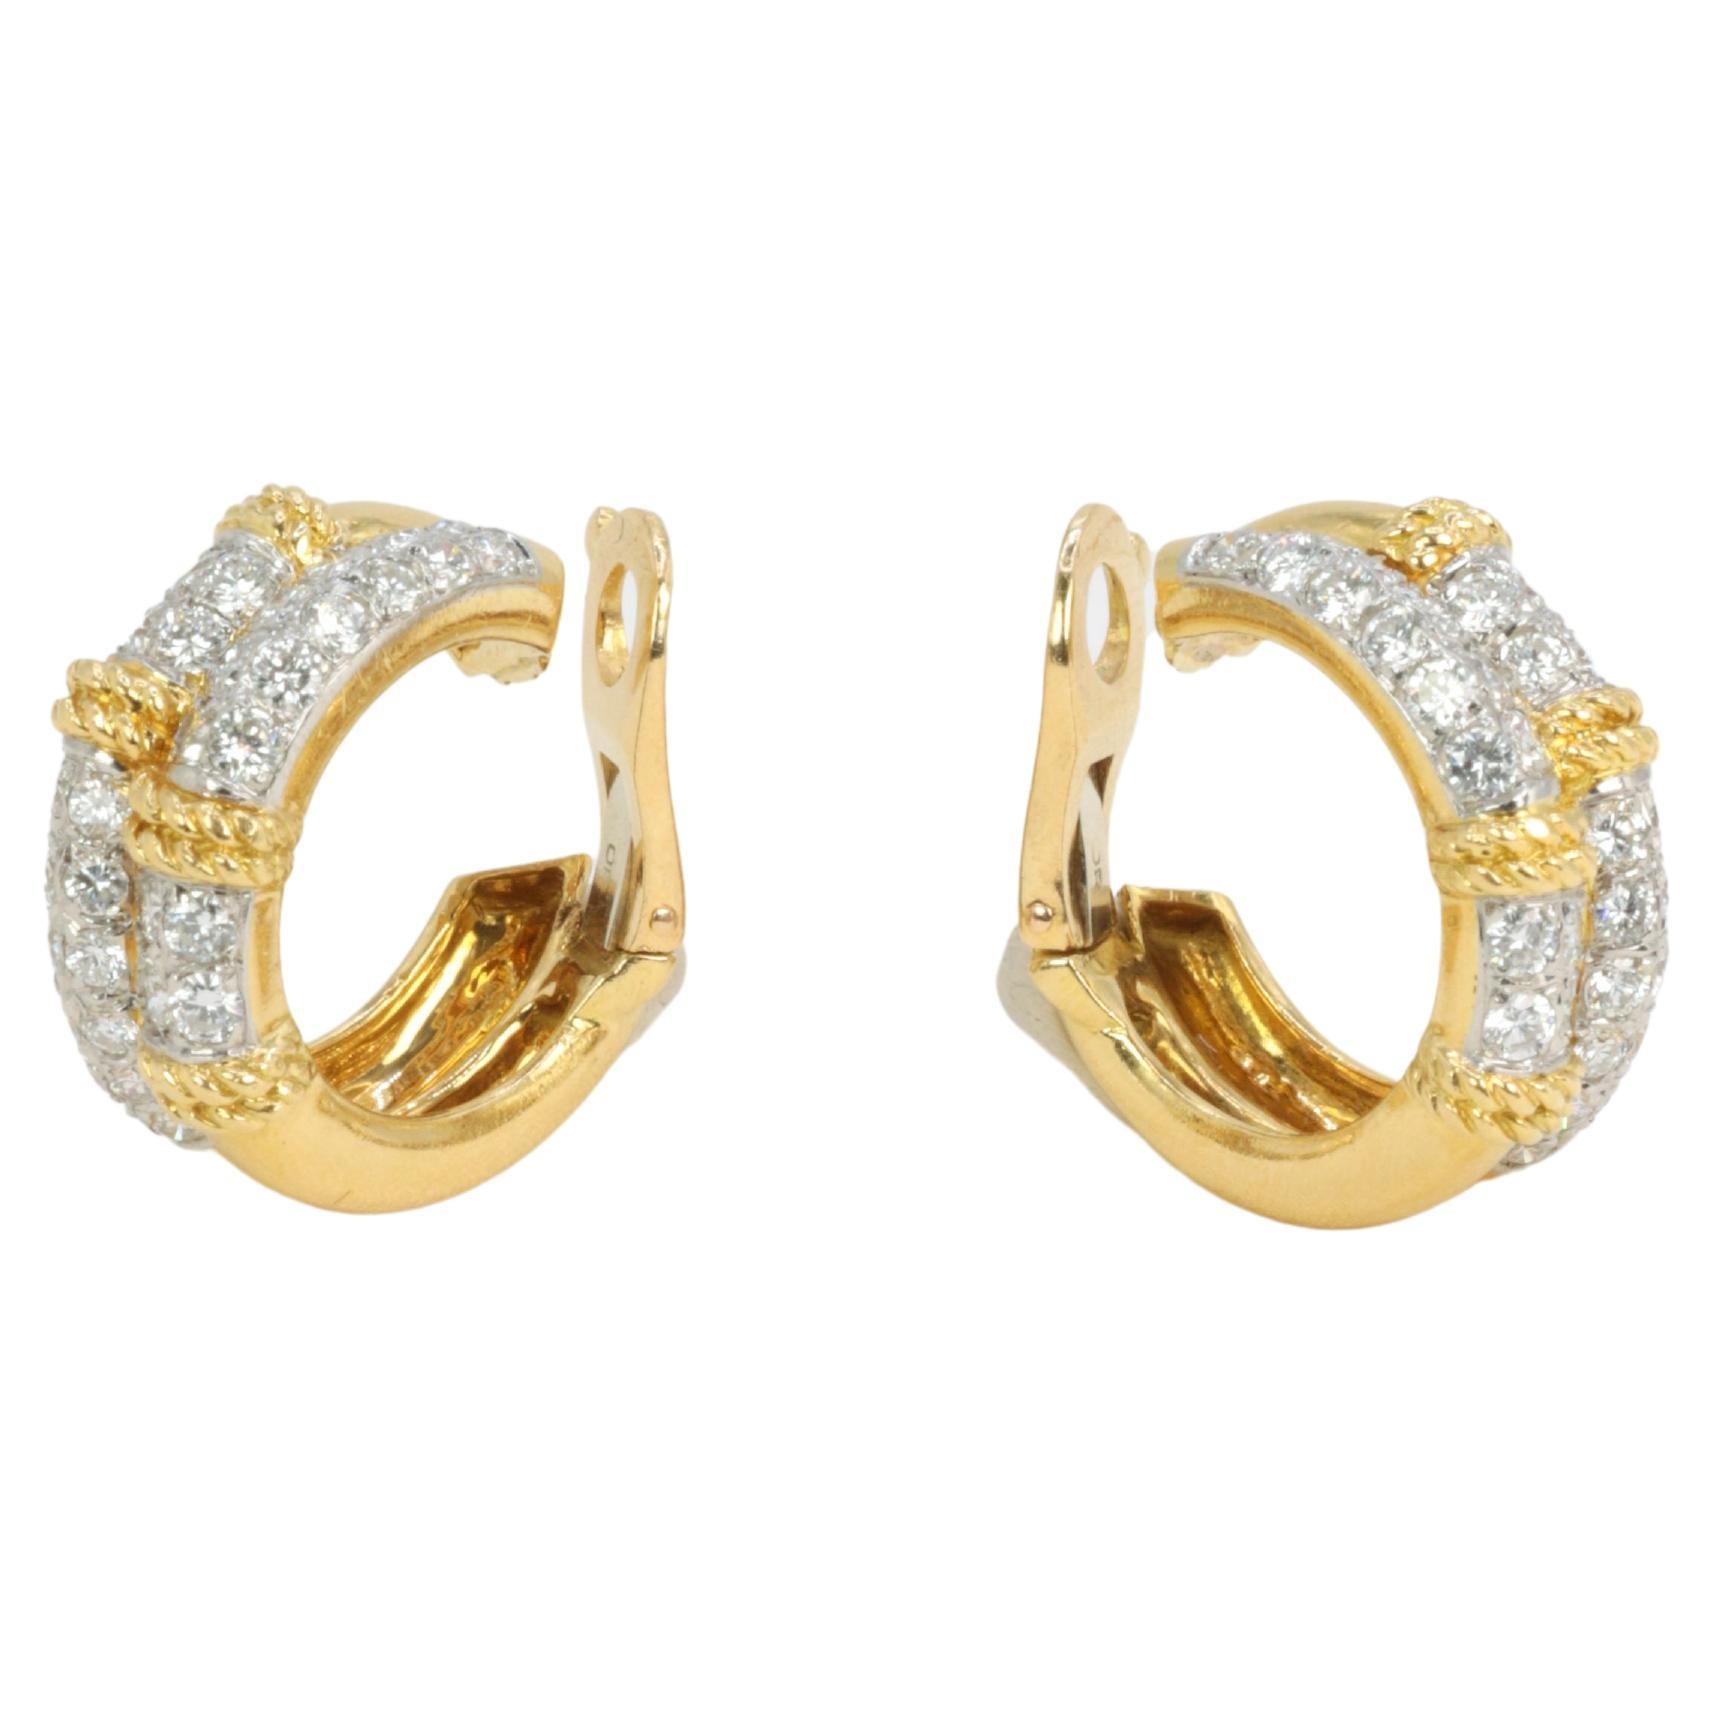 Pair of Vintage Fred "Isaure" Gold, Platinum and Diamond Earrings